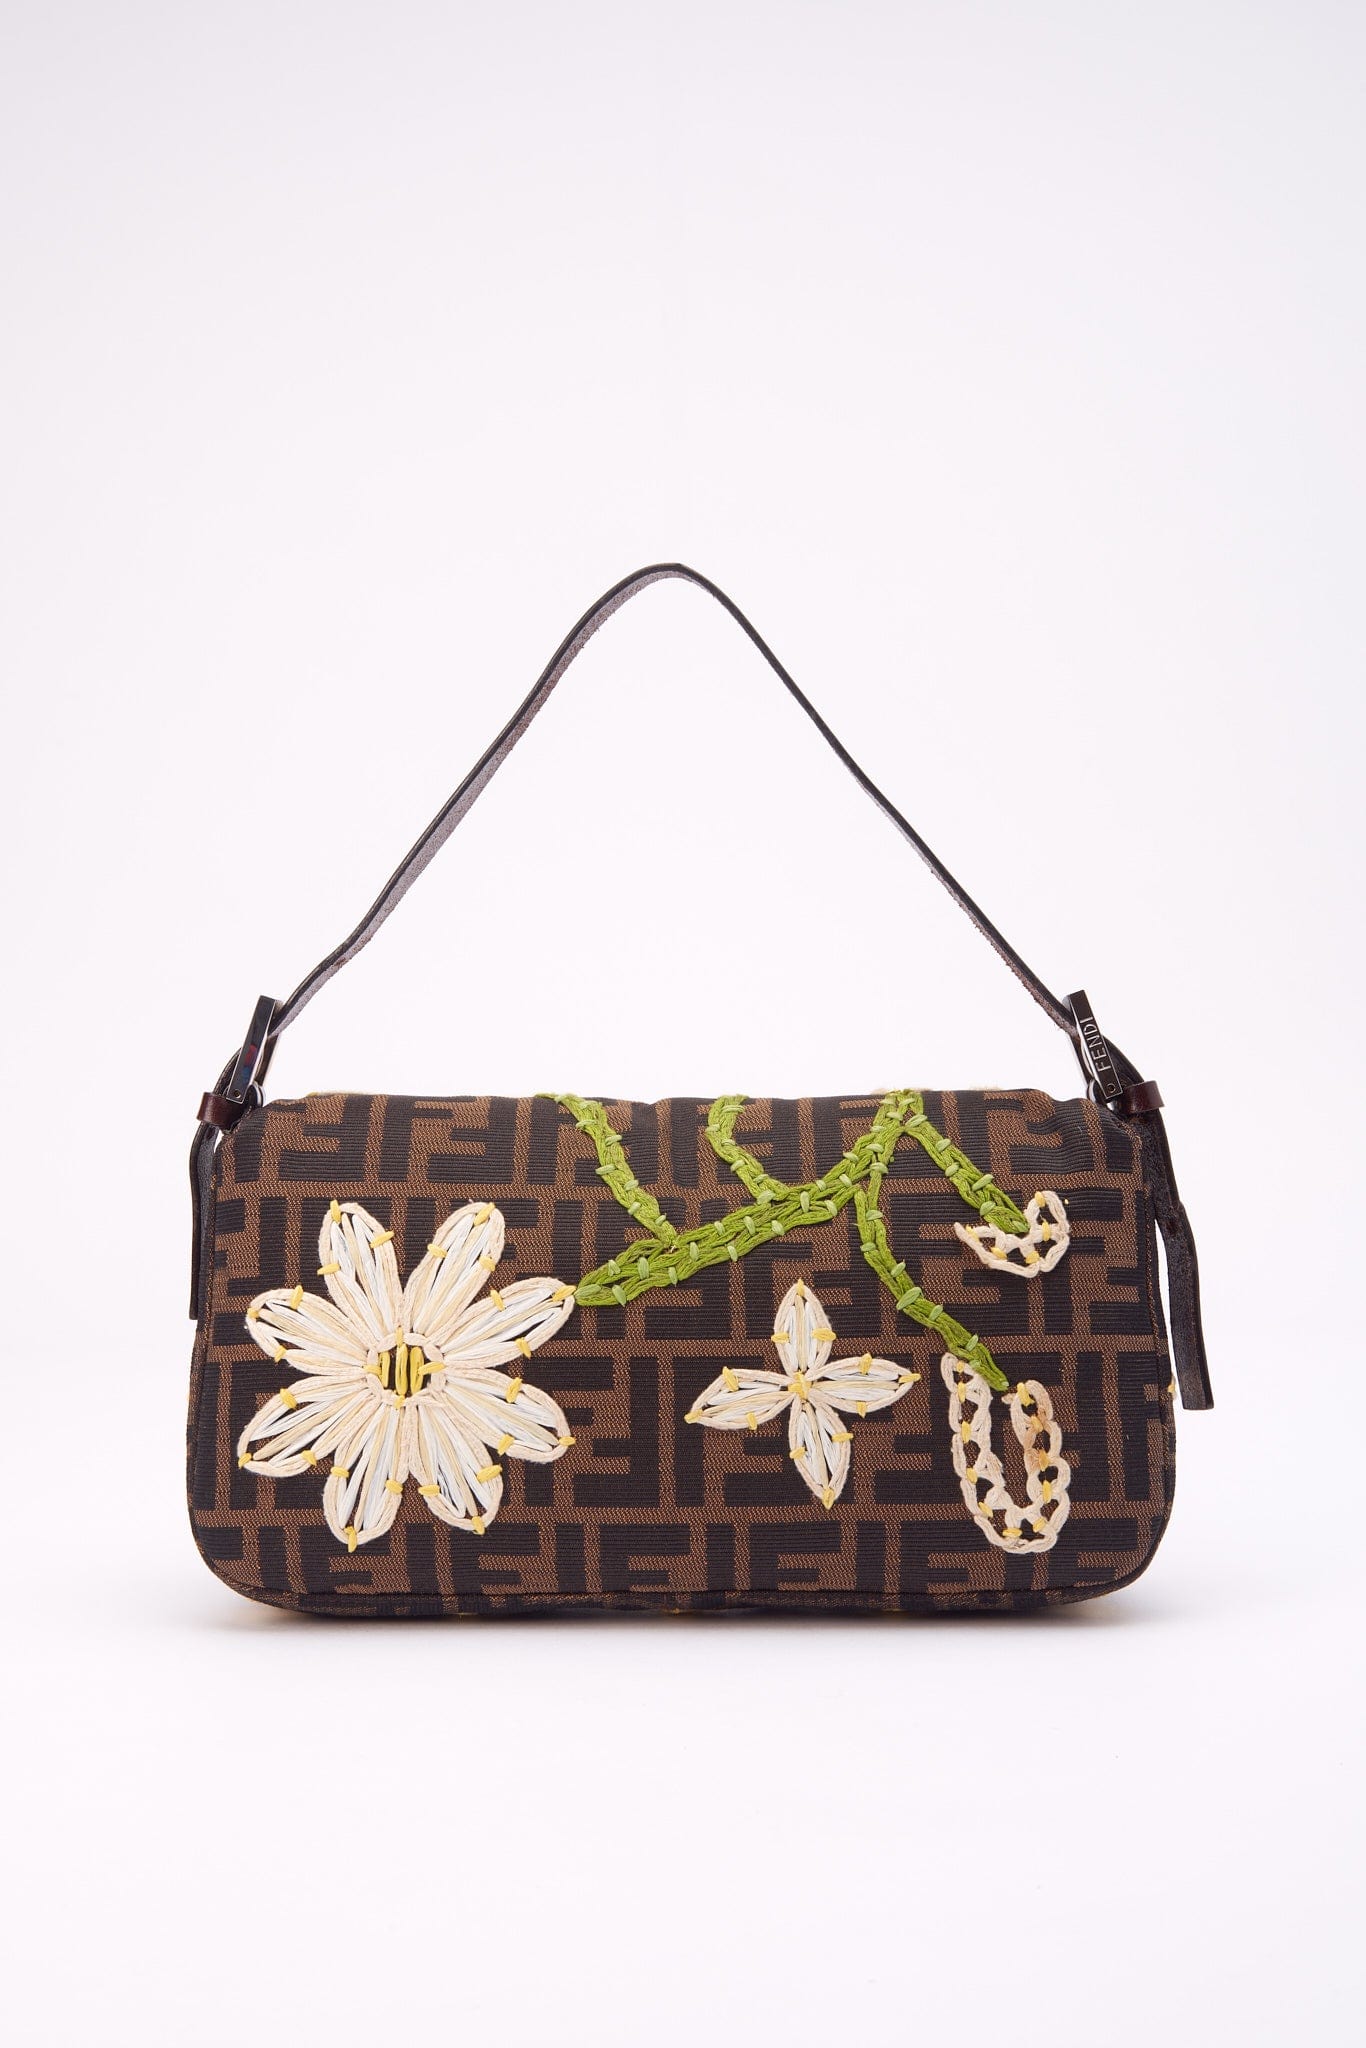 Vintage Fendi Zucca Baguette With Embroidered Flowers